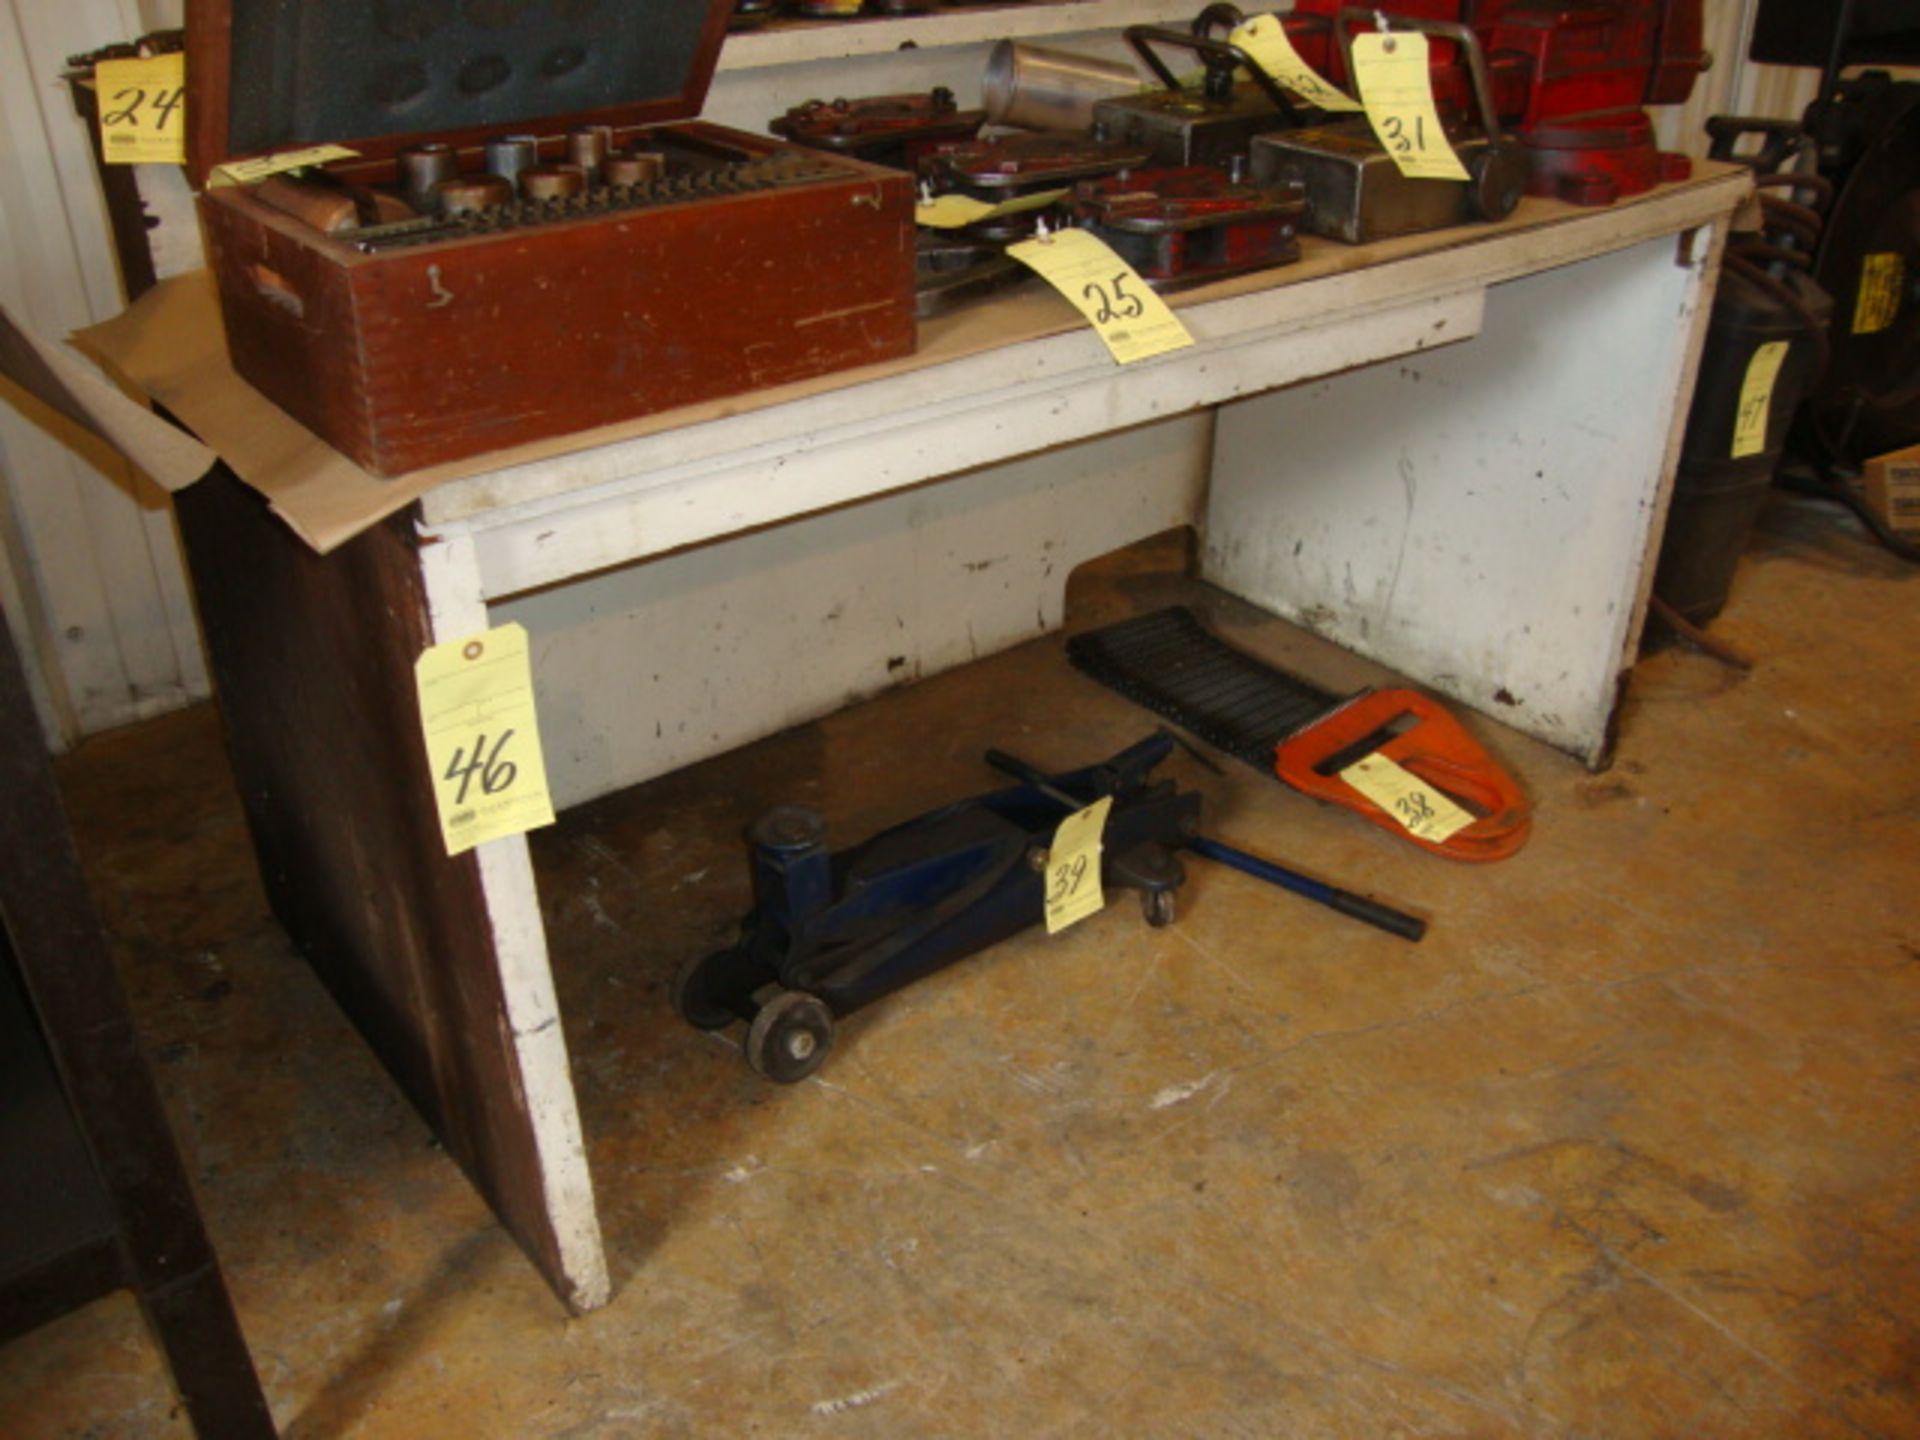 WOOD WORKTABLE, 32" x 60", wood top (may not be taken until tooling has been removed)